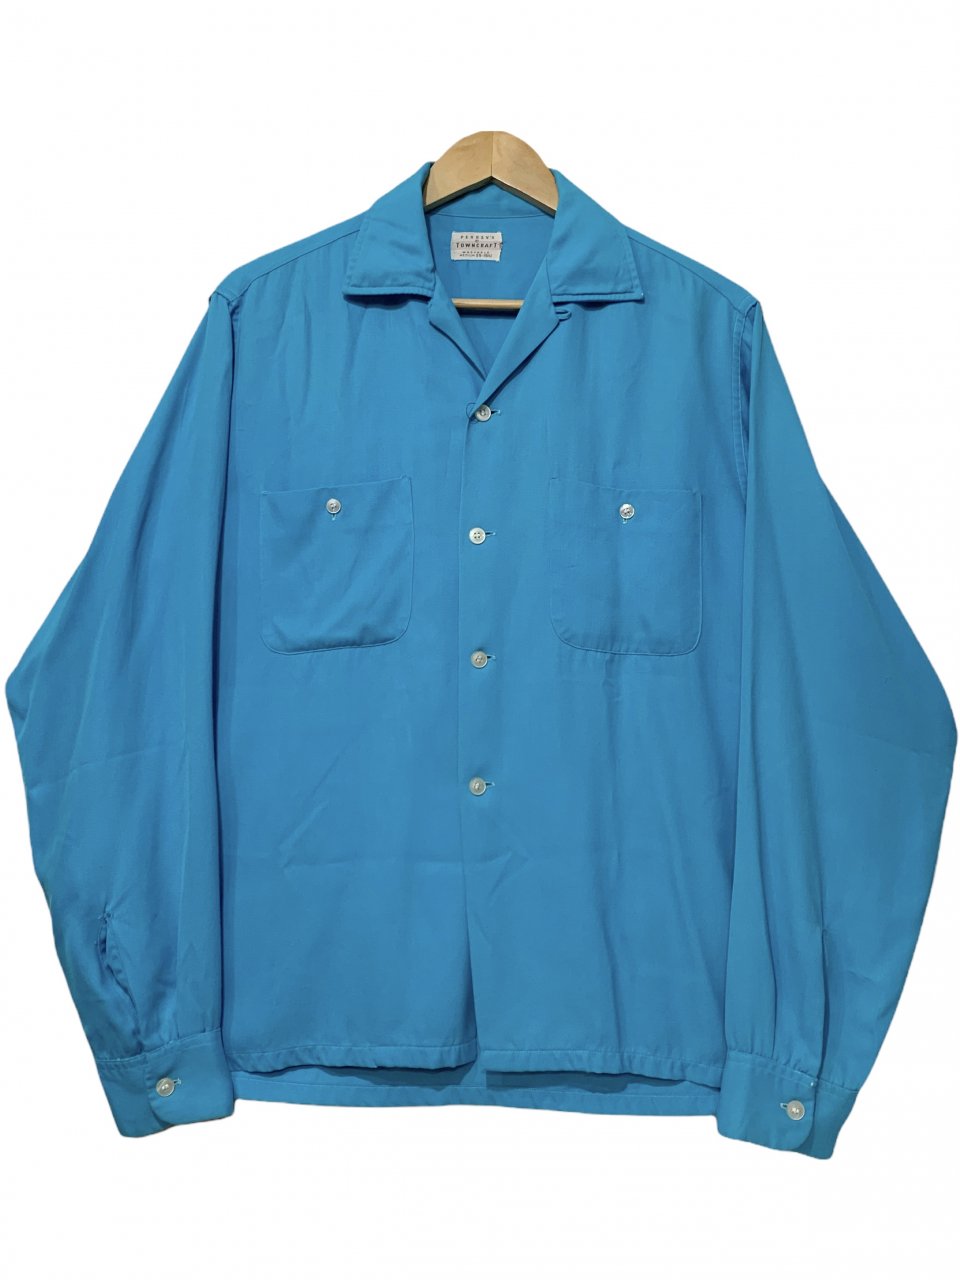 50s TOWNCRAFT Rayon Open Collar L/S Shirt 水色 M タウンクラフト 